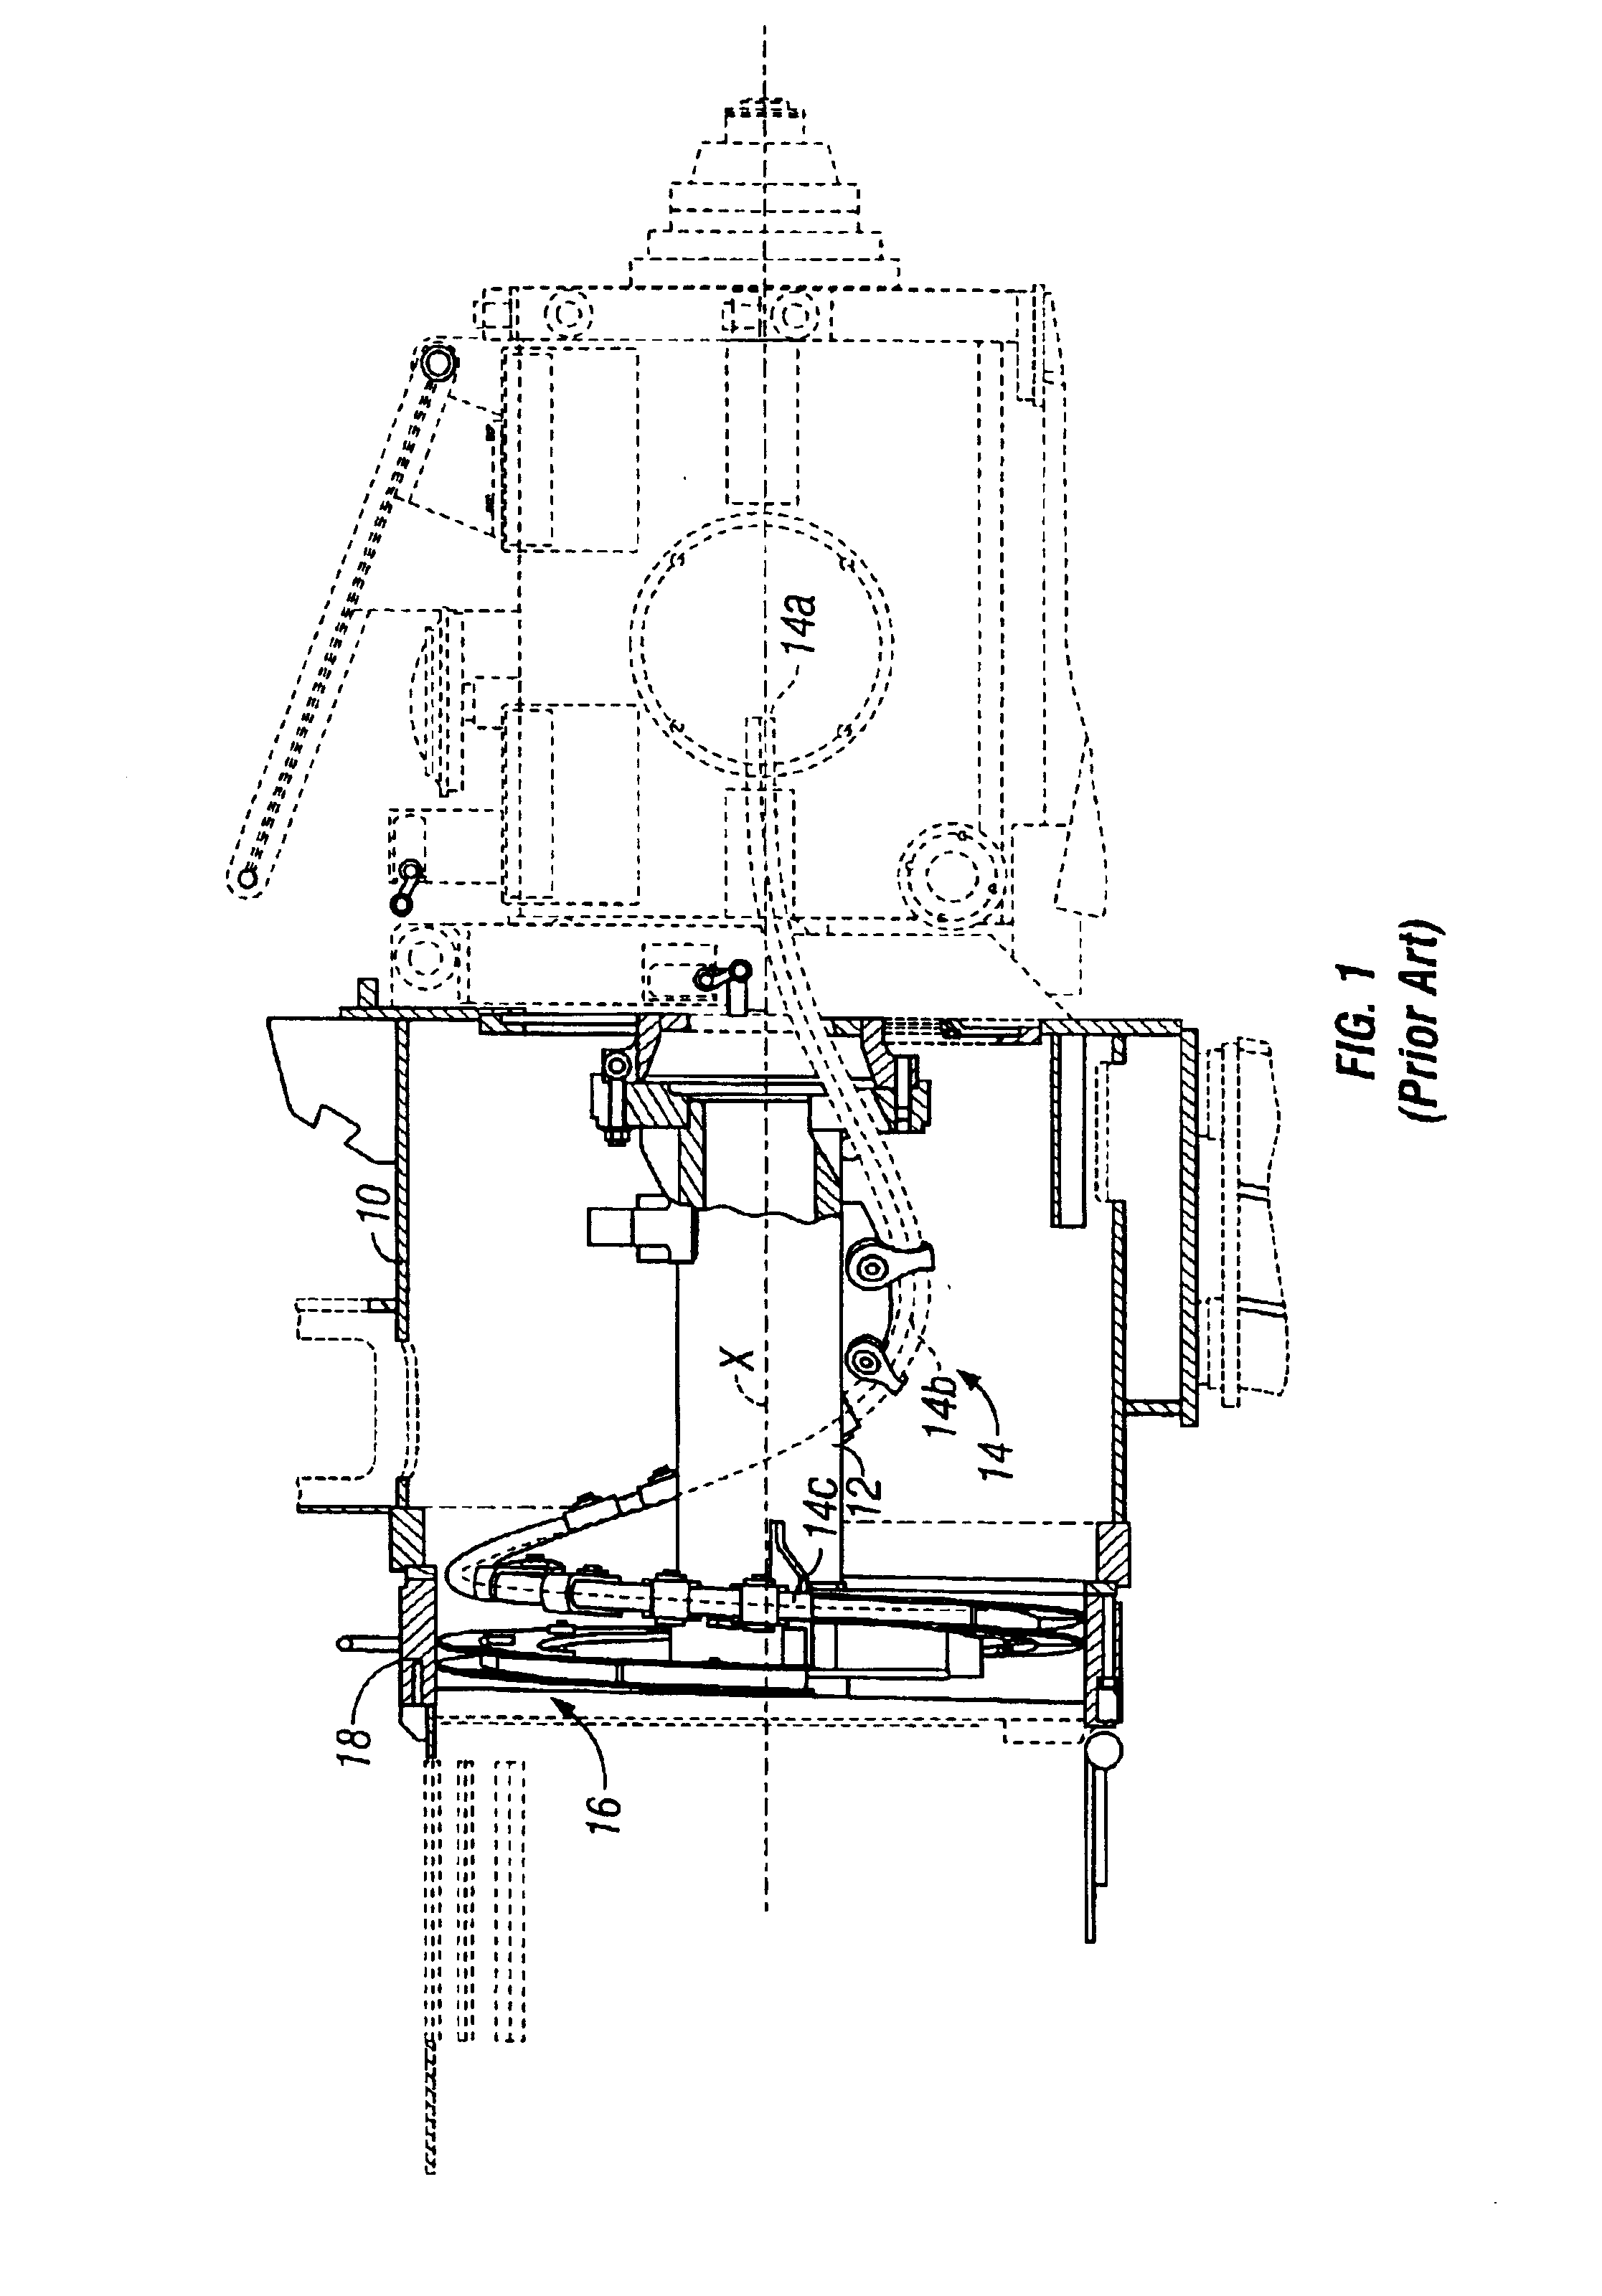 Segmented ring guide for rolling mill laying head